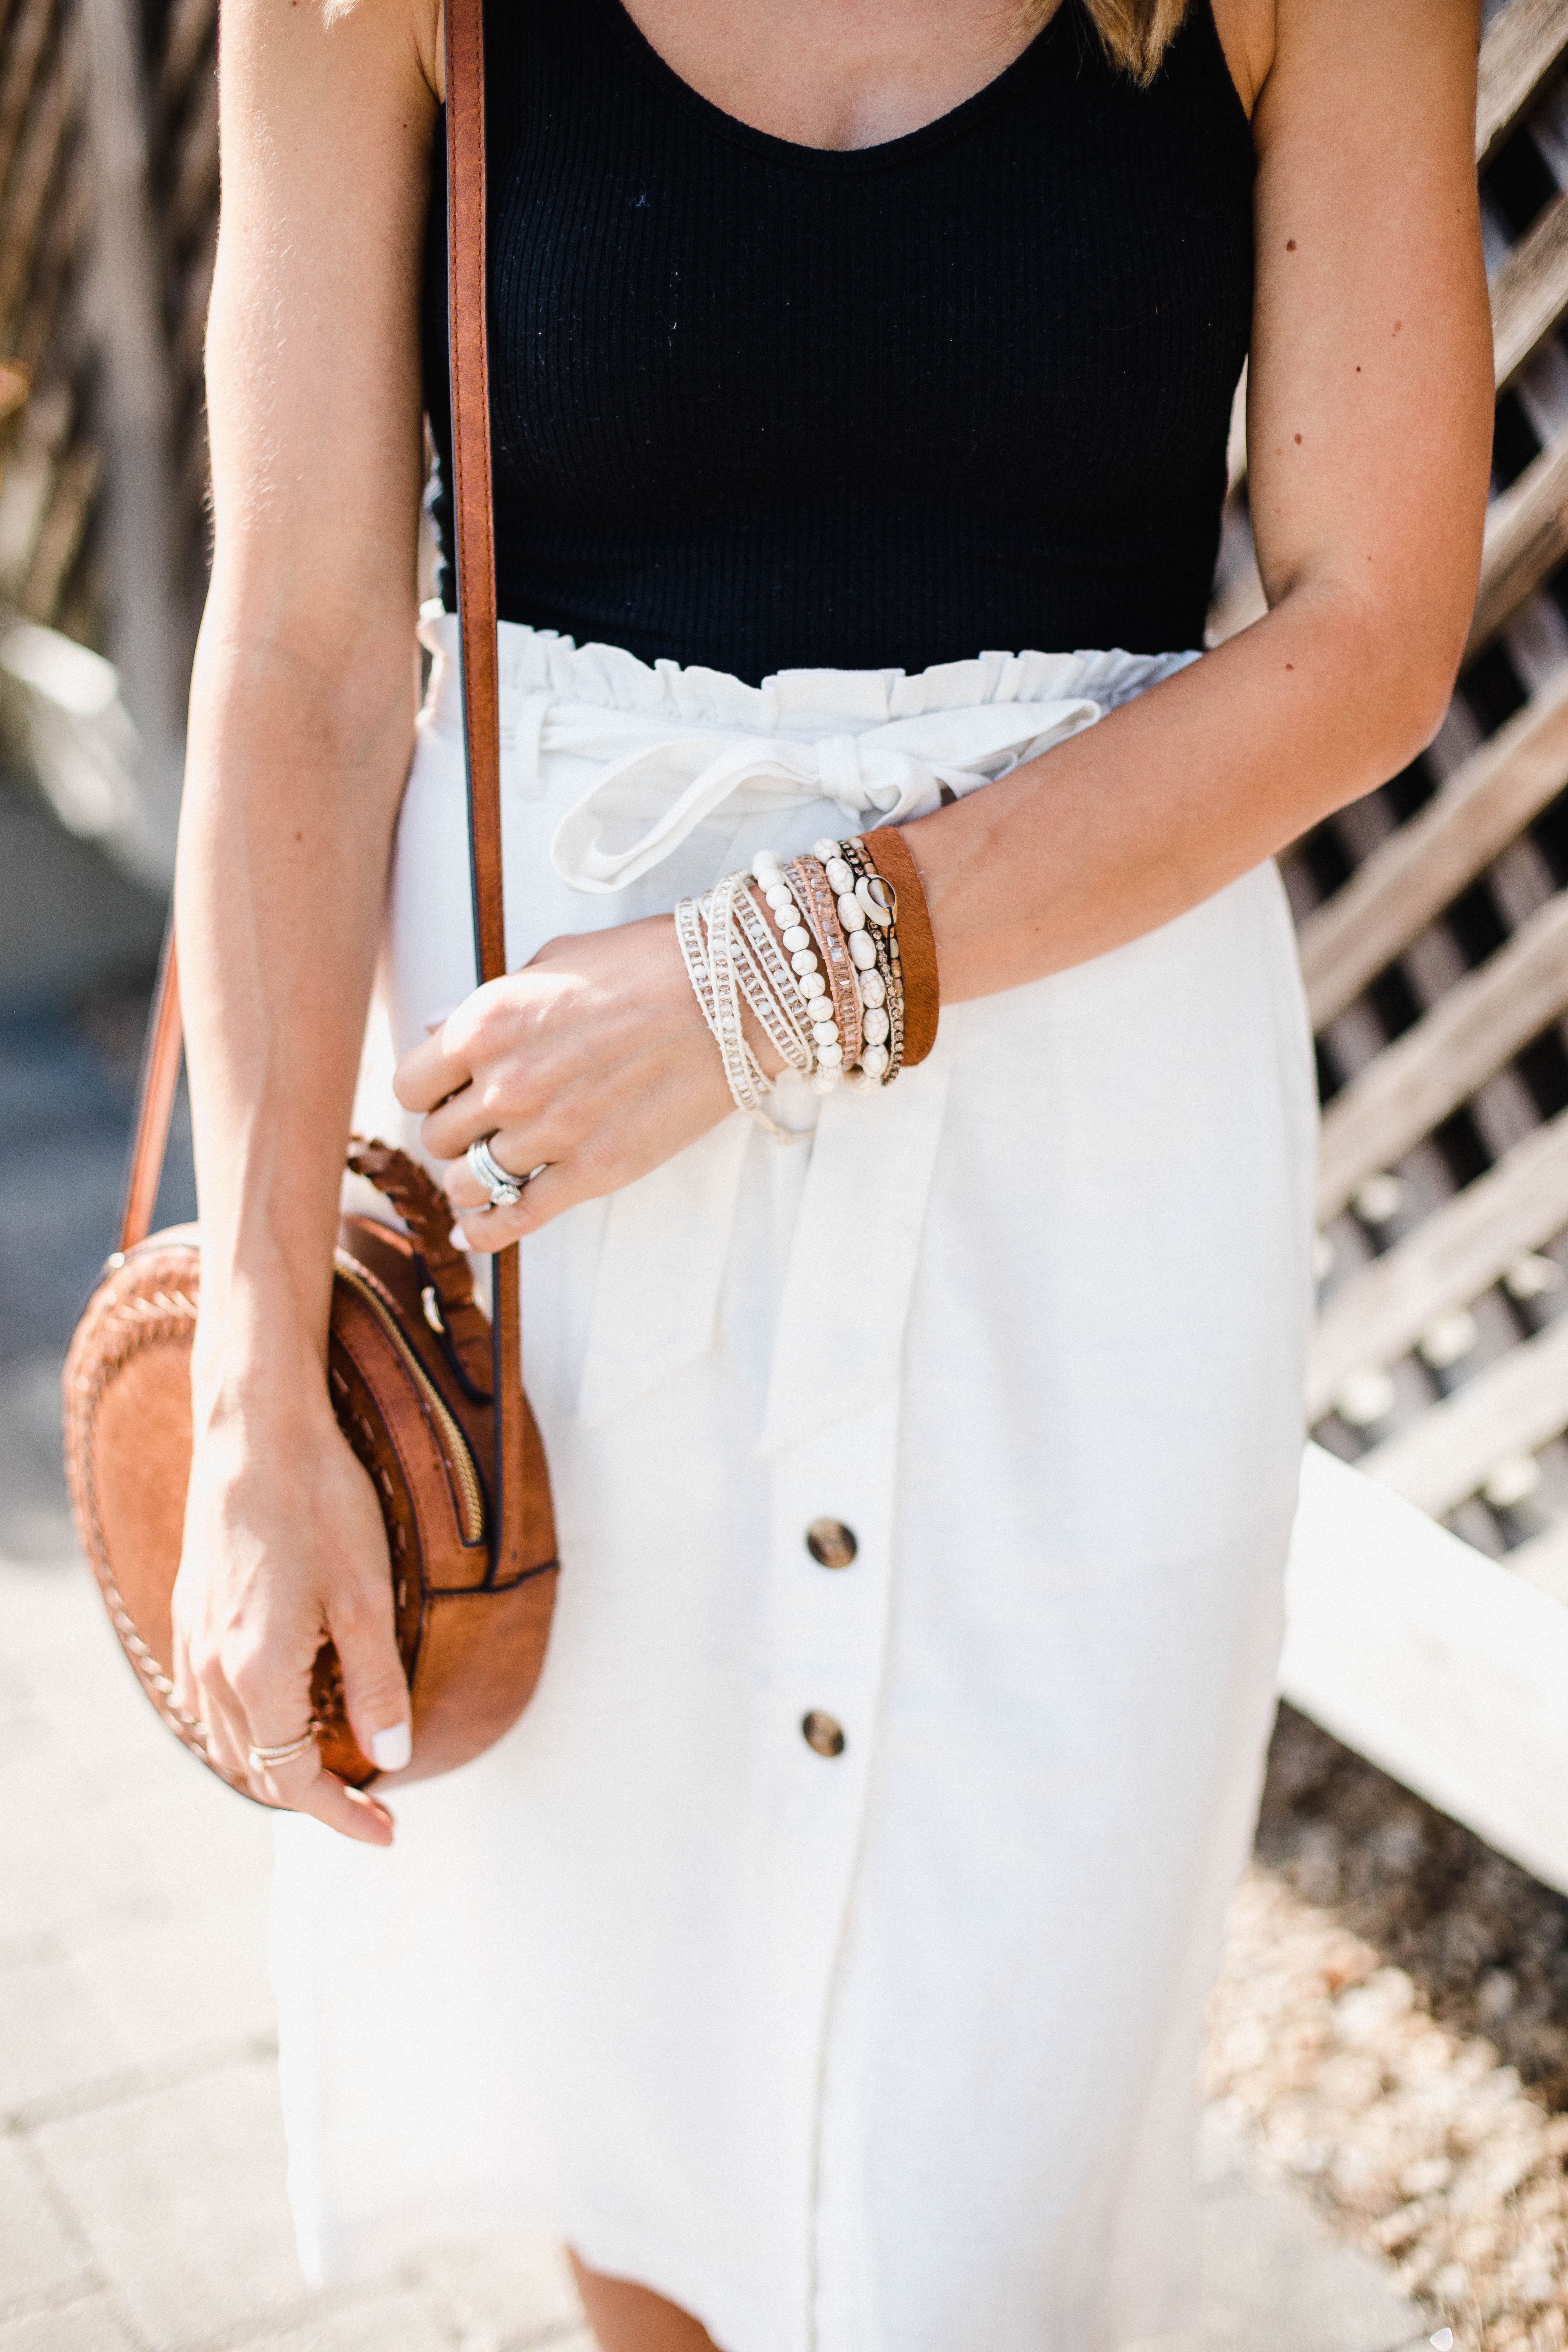 Connecticut life and style blogger Lauren McBride shares her current favorite boho accessories from Victoria Emerson, and how they impact a simple outfit.